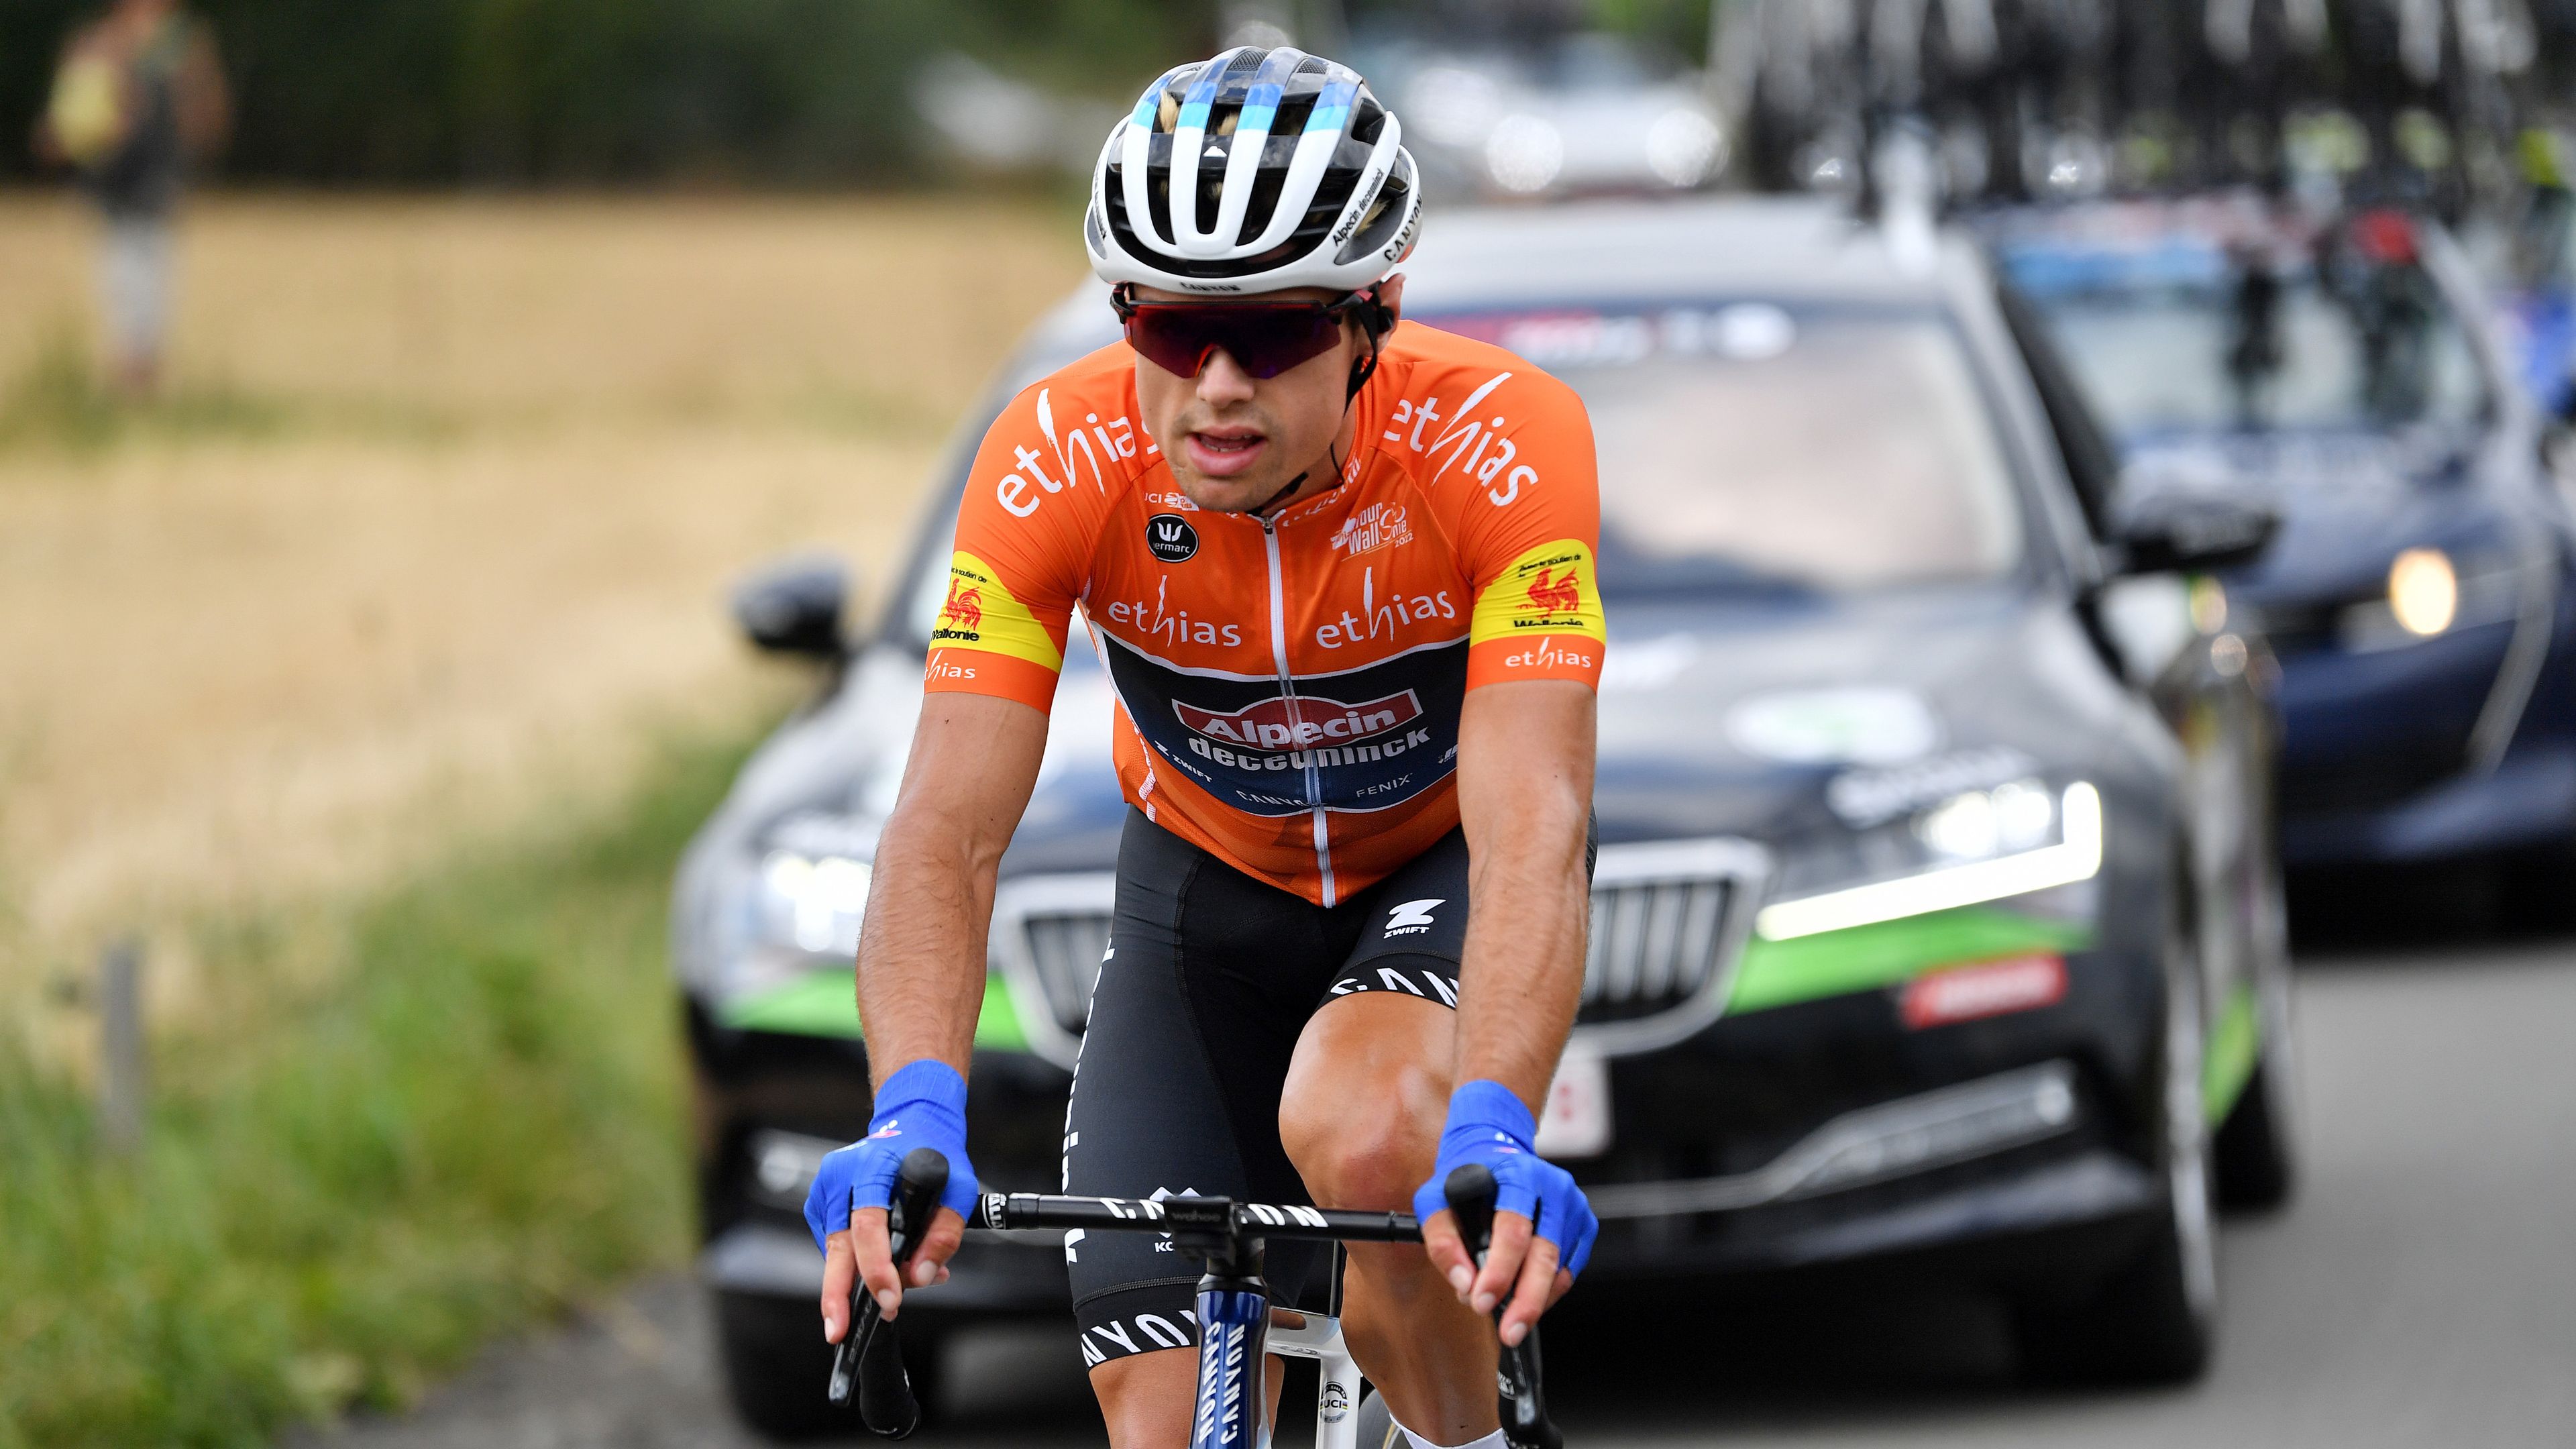 COUVIN, BELGIUM - JULY 26: Robert Stannard of Australia and Team Alpecin-Deceuninck Orange Leader Jersey competes during the 43rd Ethias - Tour de Wallonie 2022 - Stage 4 a 200,8km stage from Durbuy  to Couvin/ #ethiastourdewallonie22 / on July 26, 2022 in Couvin, Belgium. (Photo by Luc Claessen/Getty Images)